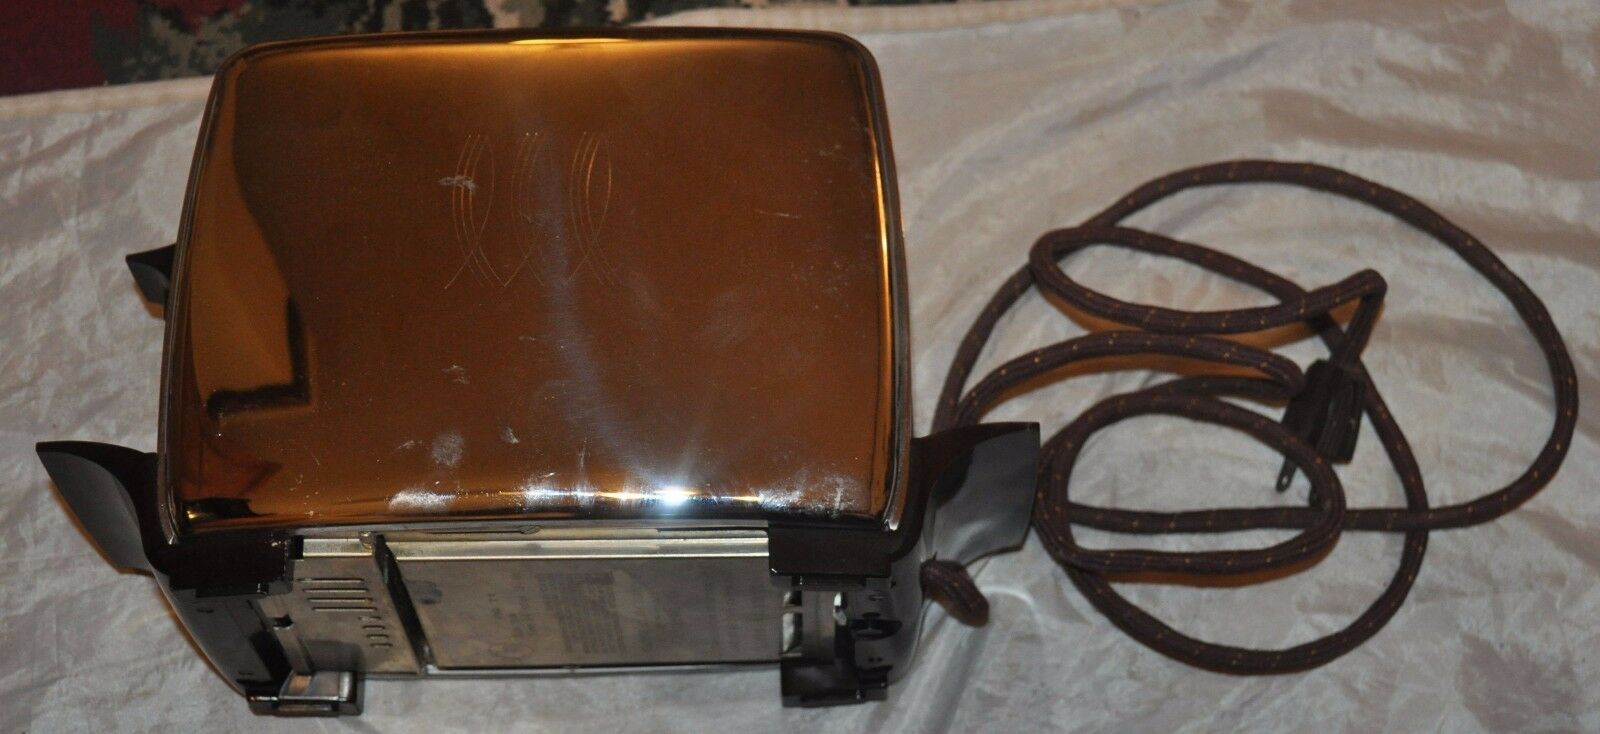 Primary image for Vintage Chrome ToastMaster Two Slice Toaster Model 1B22 By McGraw WORKS!